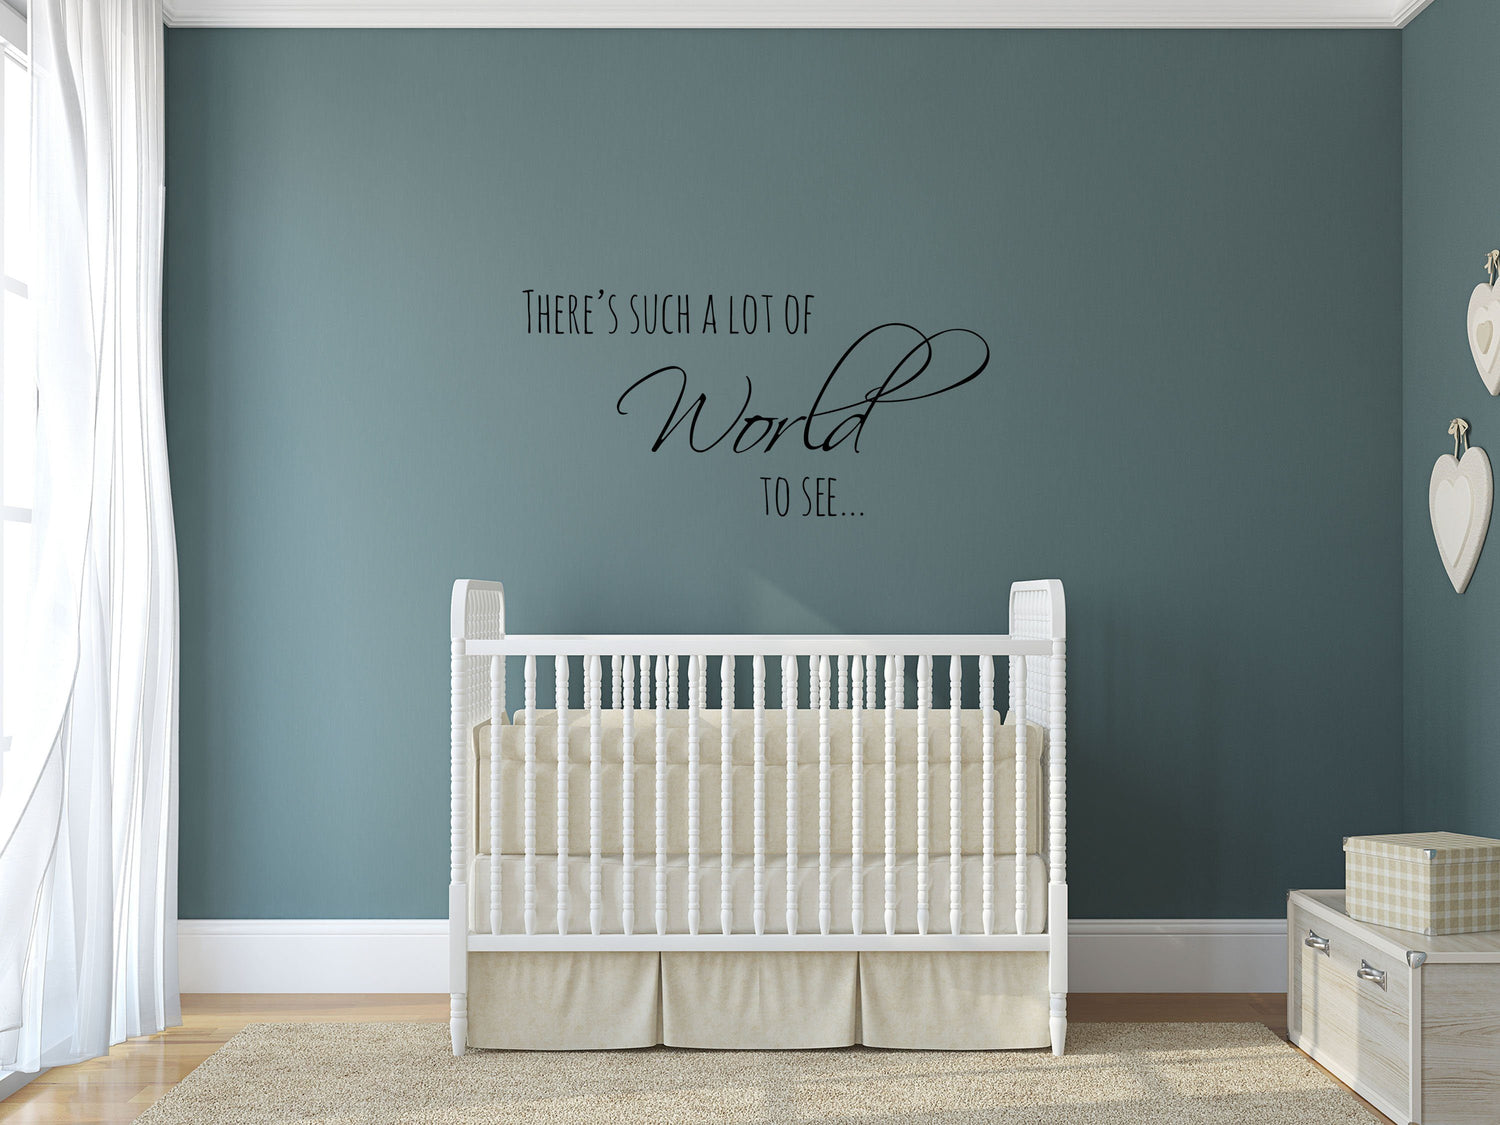 There's Such a Lot of World to See Nursery Vinyl Wall Decal - Baby Room Sign - Boy and Girl Room Wall Decal Vinyl Wall Decal Done 